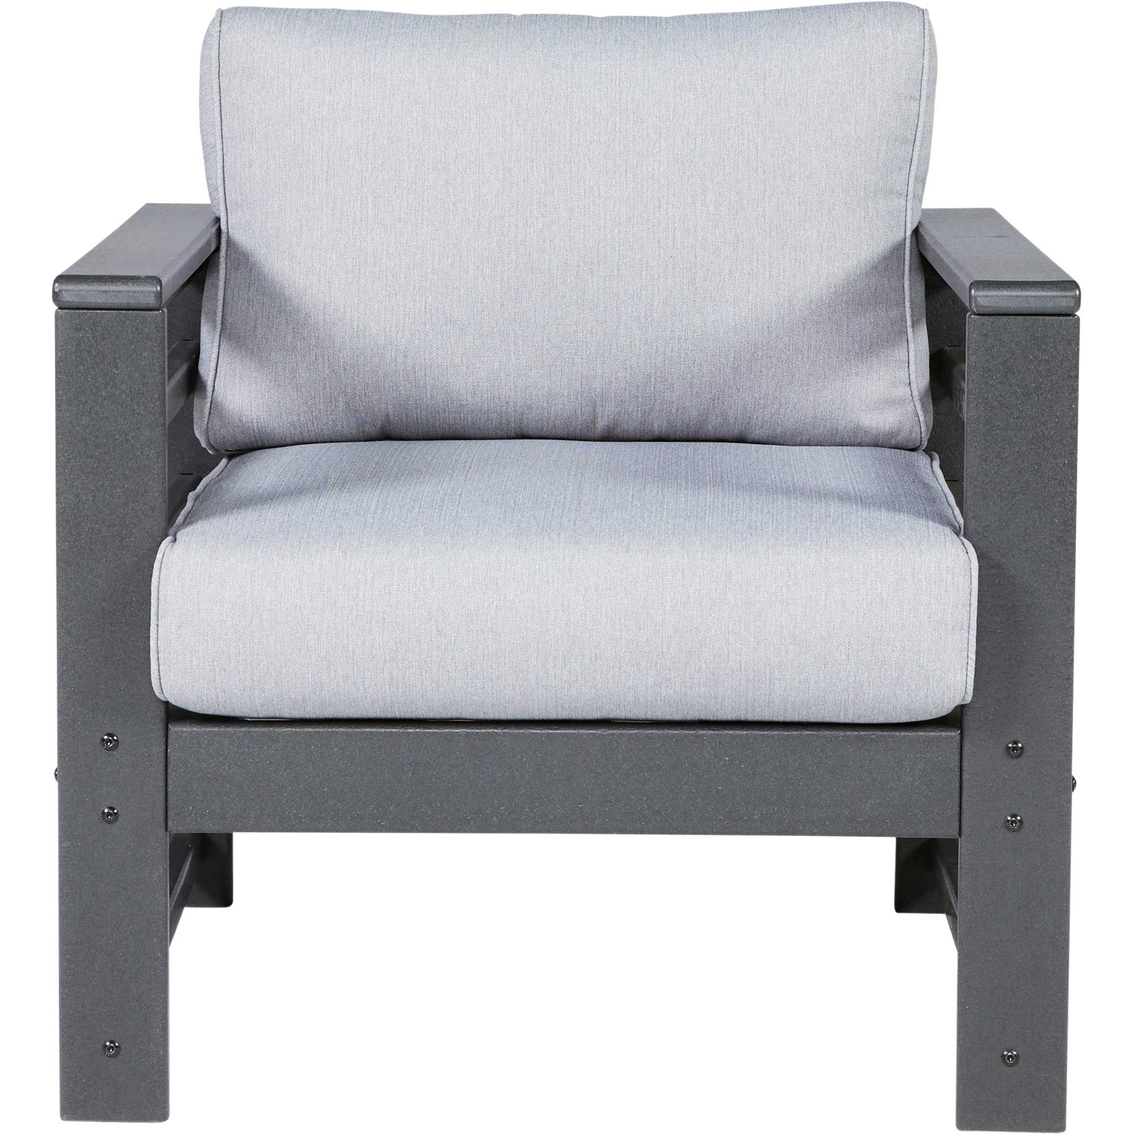 Signature Design by Ashley Amora Collection Outdoor Lounge Chair with Cushion 2 pk. - Image 2 of 7